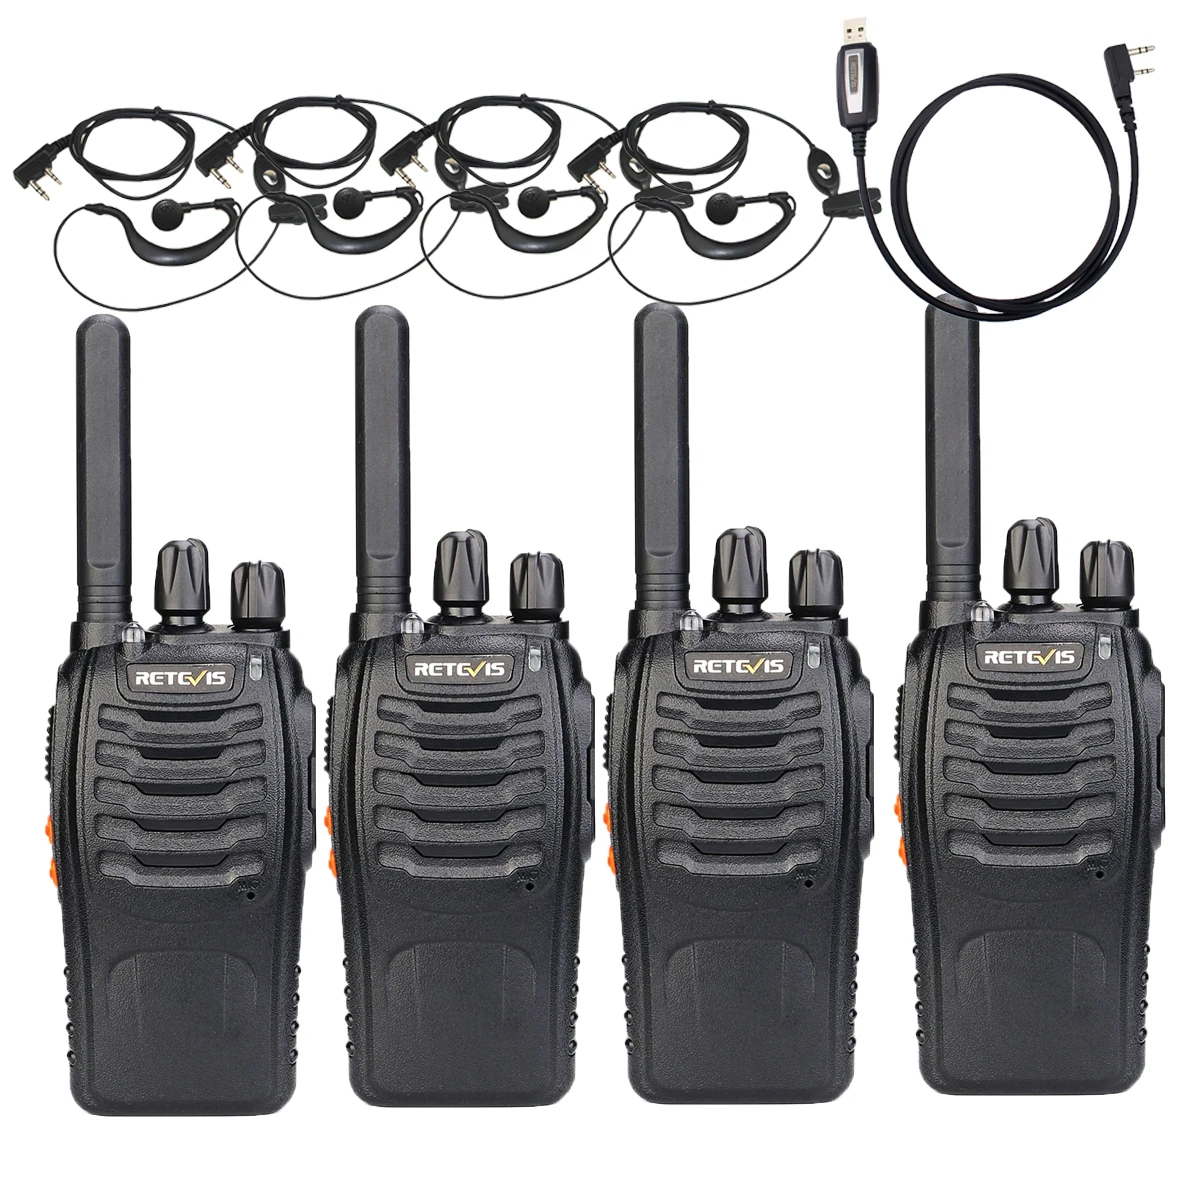 

4PACK Cheap church Walkie Talkie Retevis H777 For Transport Supermarket 2W UHF 16CH two way Radio+earpiece+Programming Cable